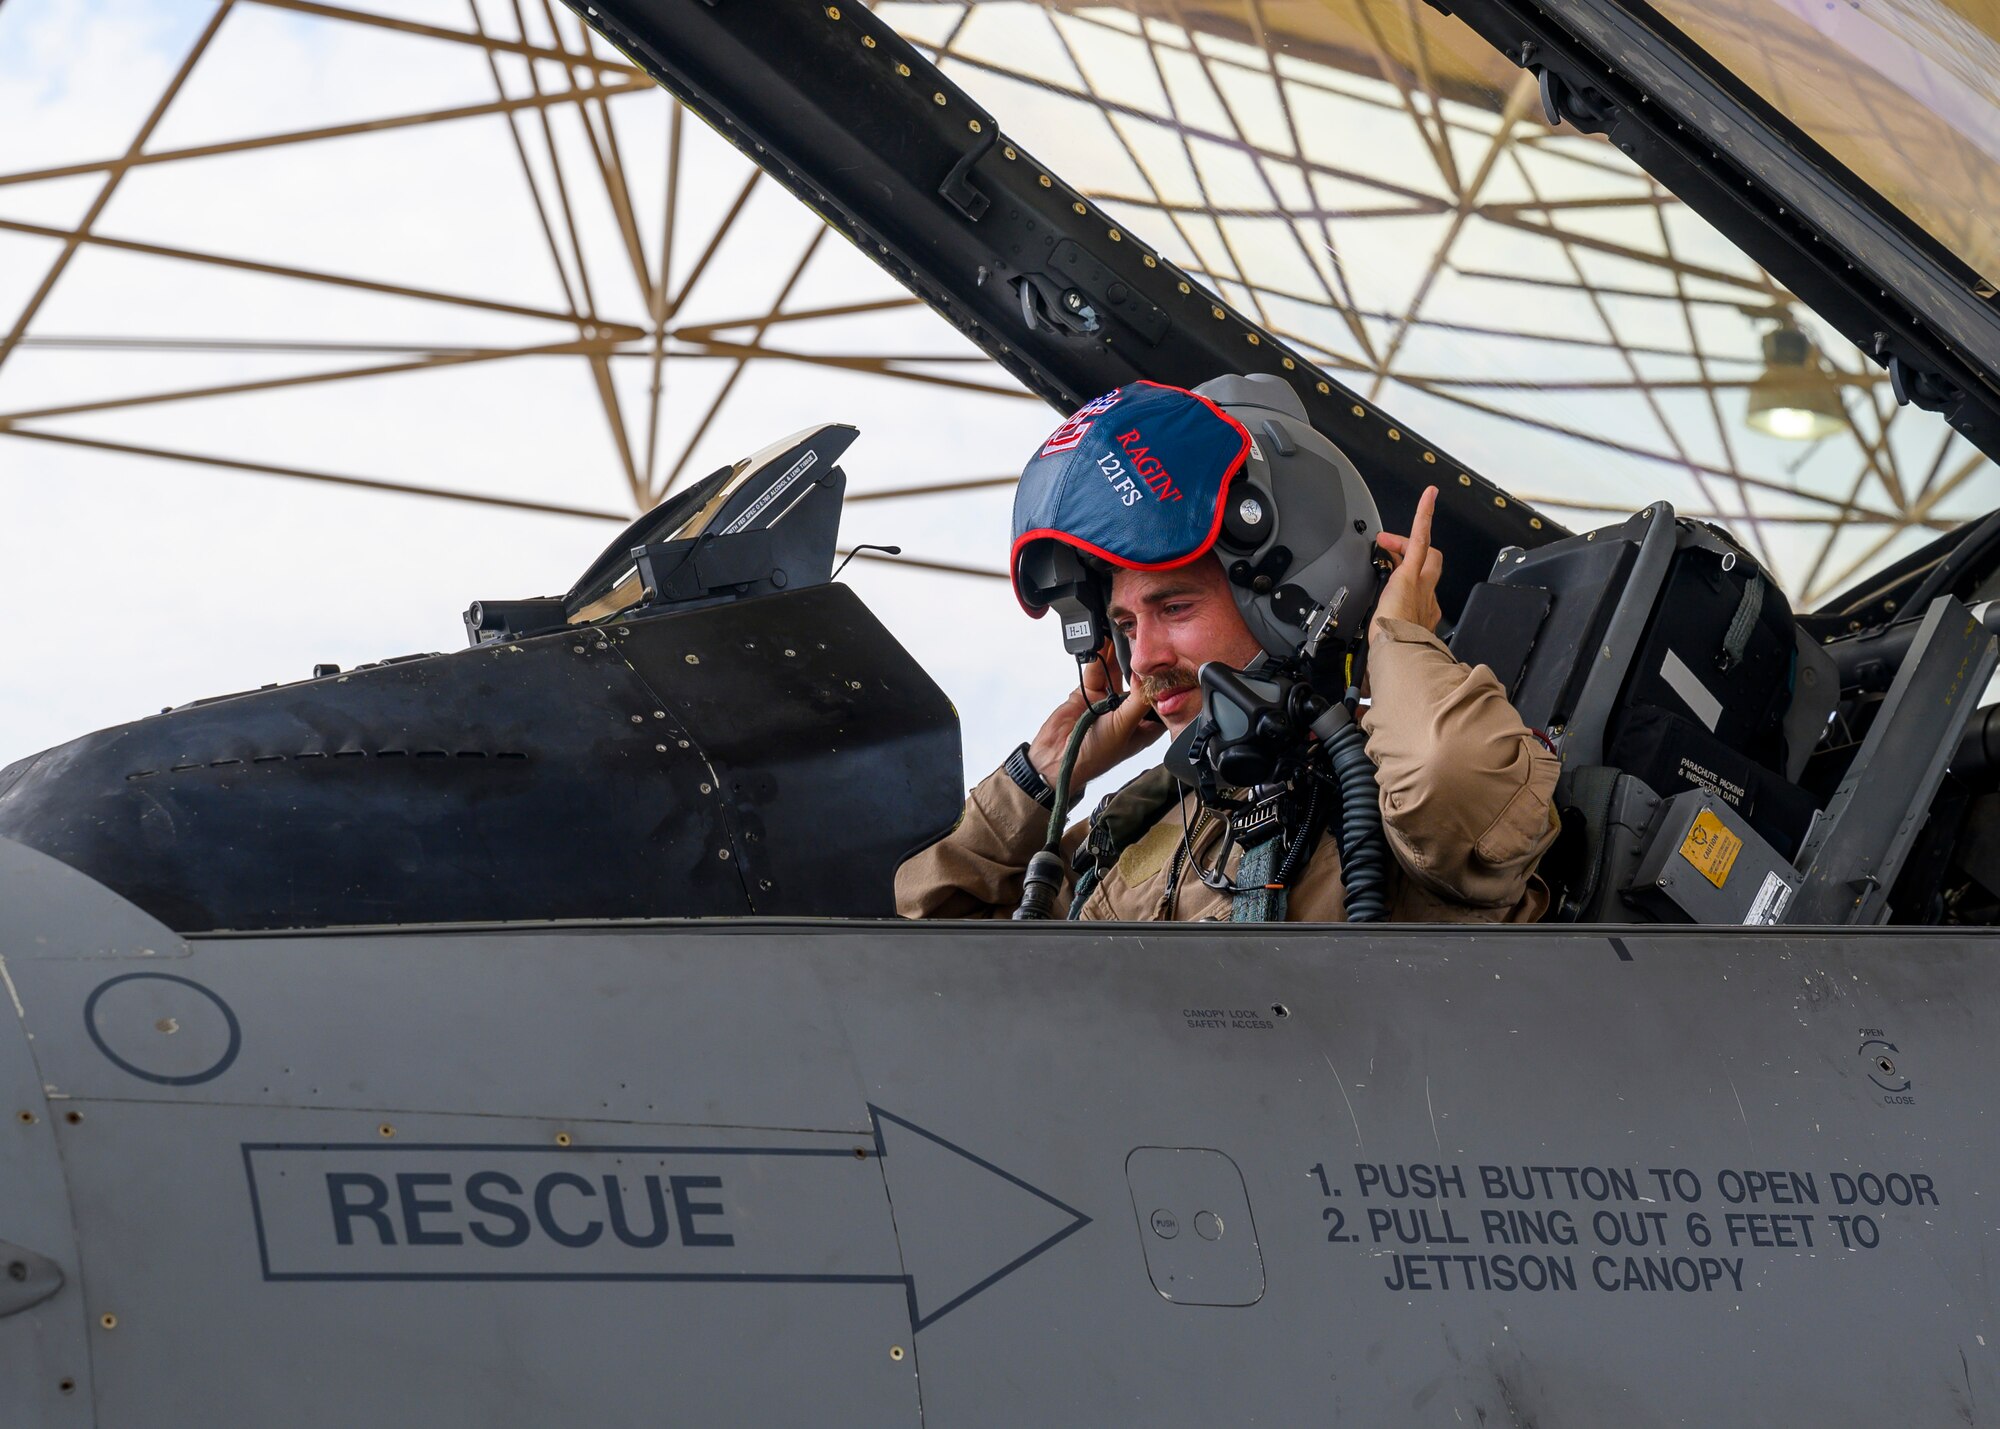 A U.S. Air Force F-16 pilot assigned to the 121st Expeditionary Fighter Squadron adjusts his helmet prior to takeoff during Exercise Sky Shield III at Al Udeid Air Base, Qatar, Aug. 3, 2021. Sky Shield is a bilateral defensive counter air and combat search and rescue exercise designed to validate U.S. Air Forces Central and Qatar Emiri Air Force’s combined capability to defend regional airspace. The event allowed the 378th Air Expeditionary Wing to demonstrate its agile combat employment capabilities of repositioning forces in various locations and rapidly generating combat airpower. (U.S. Air Force photo by Senior Airman Samuel Earick)